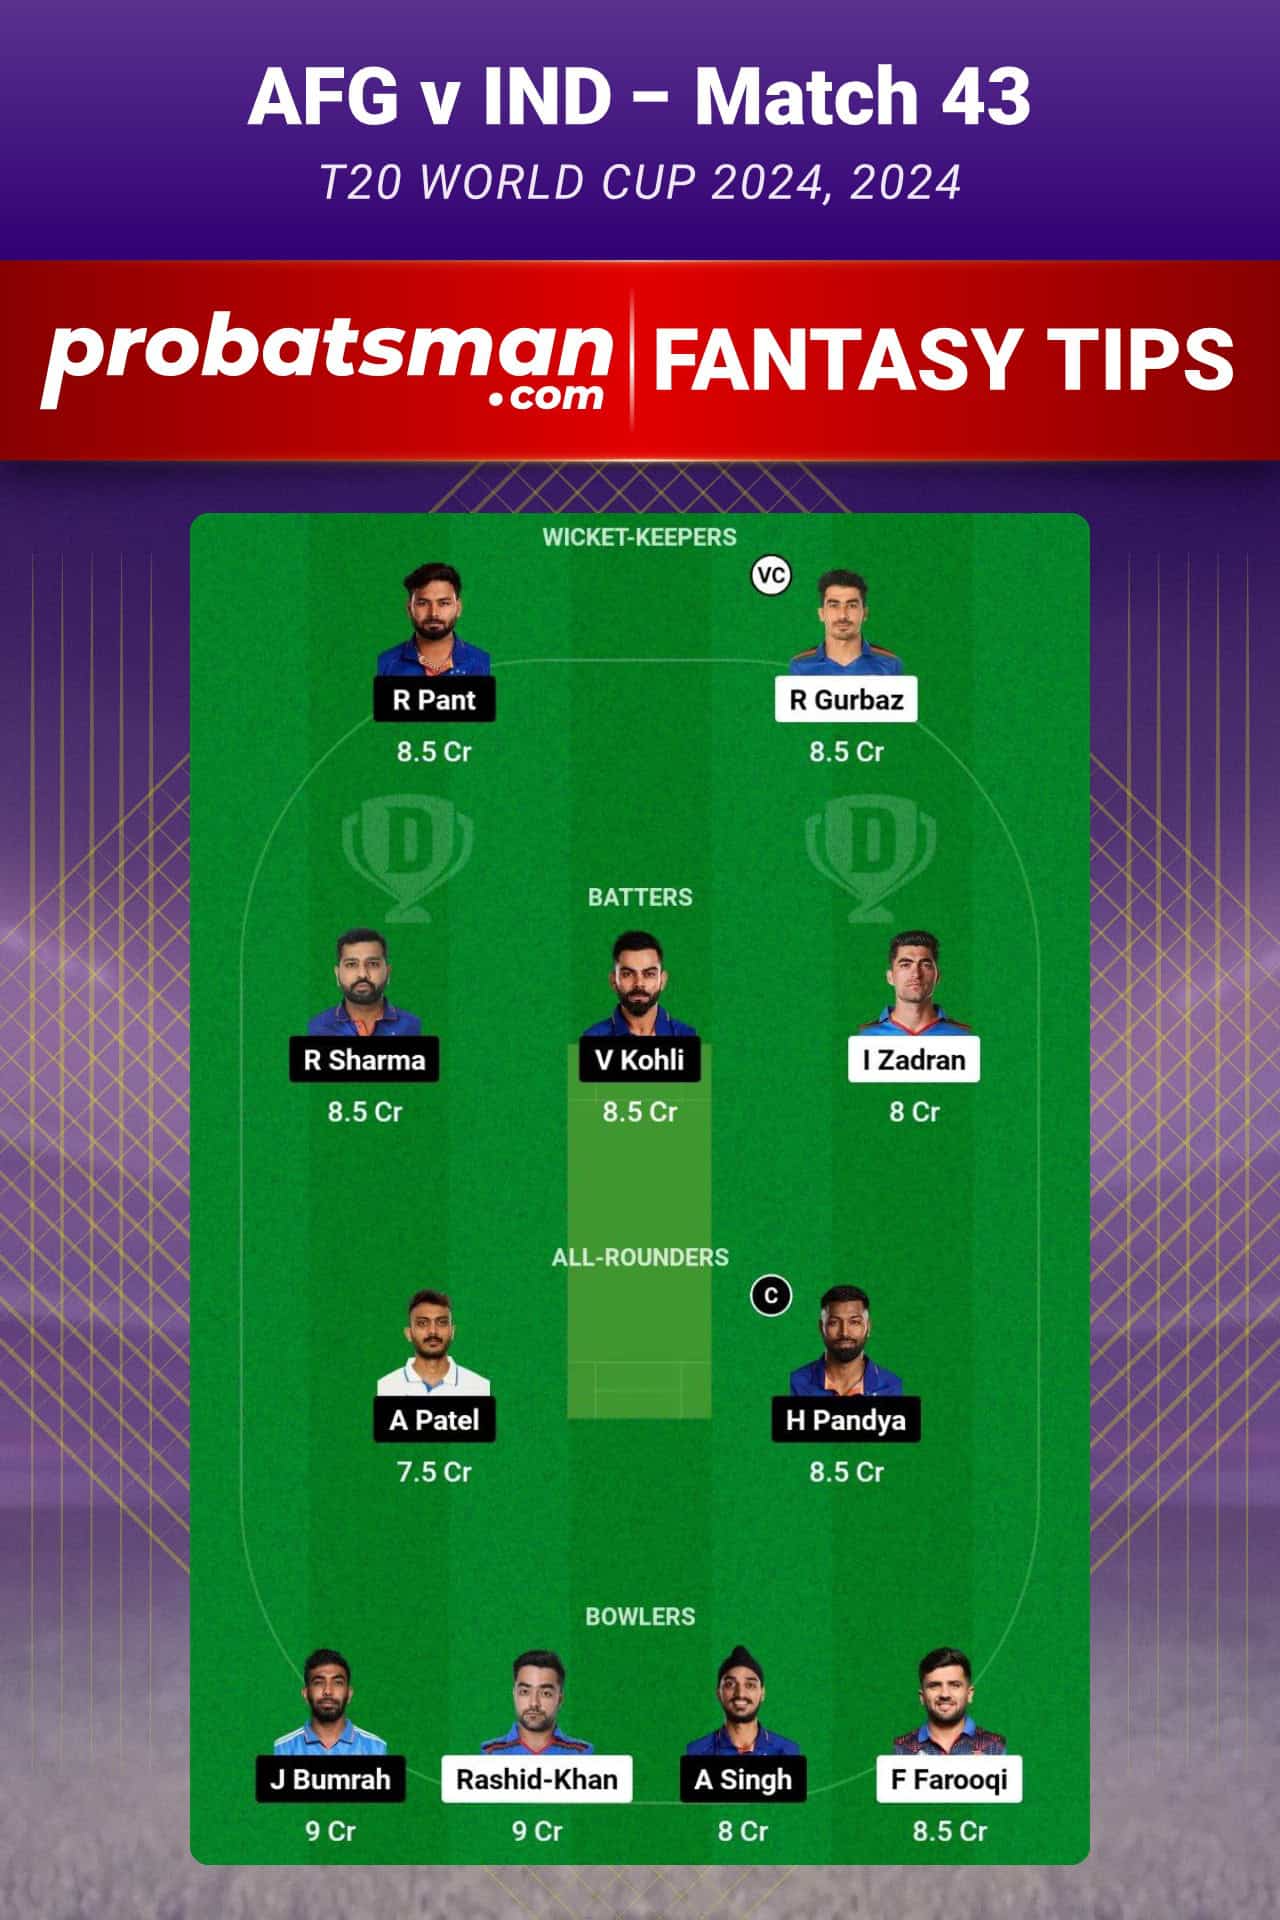 AFG vs IND Dream11 Prediction For Match 43 of T20 World Cup 2024